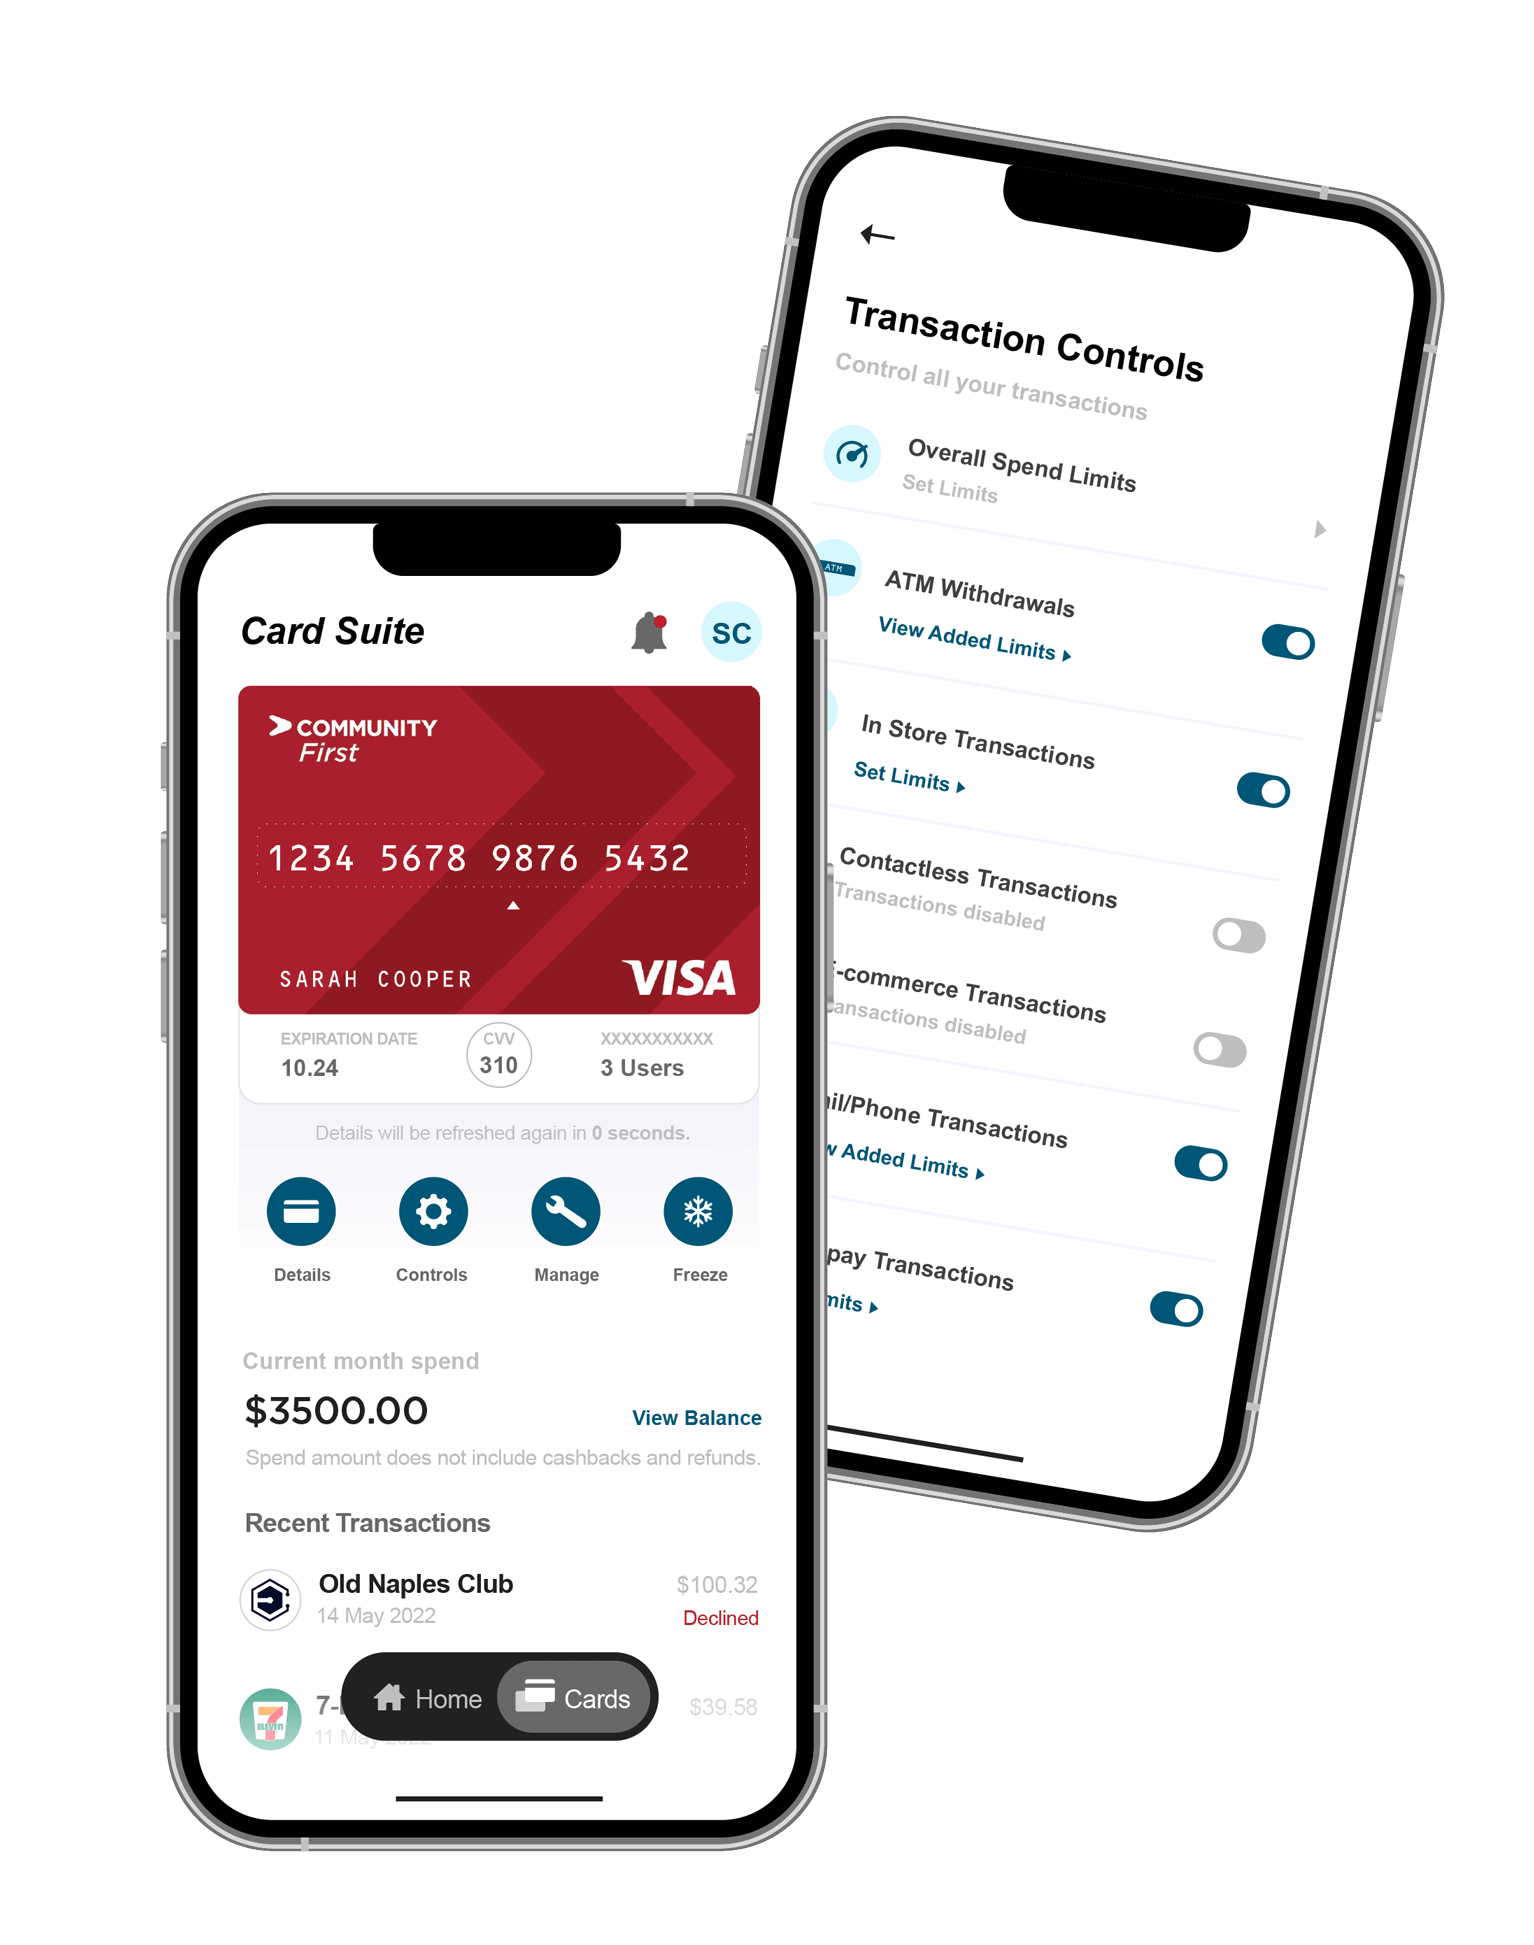 Card Suite lets you manage your payment cards from your mobile device